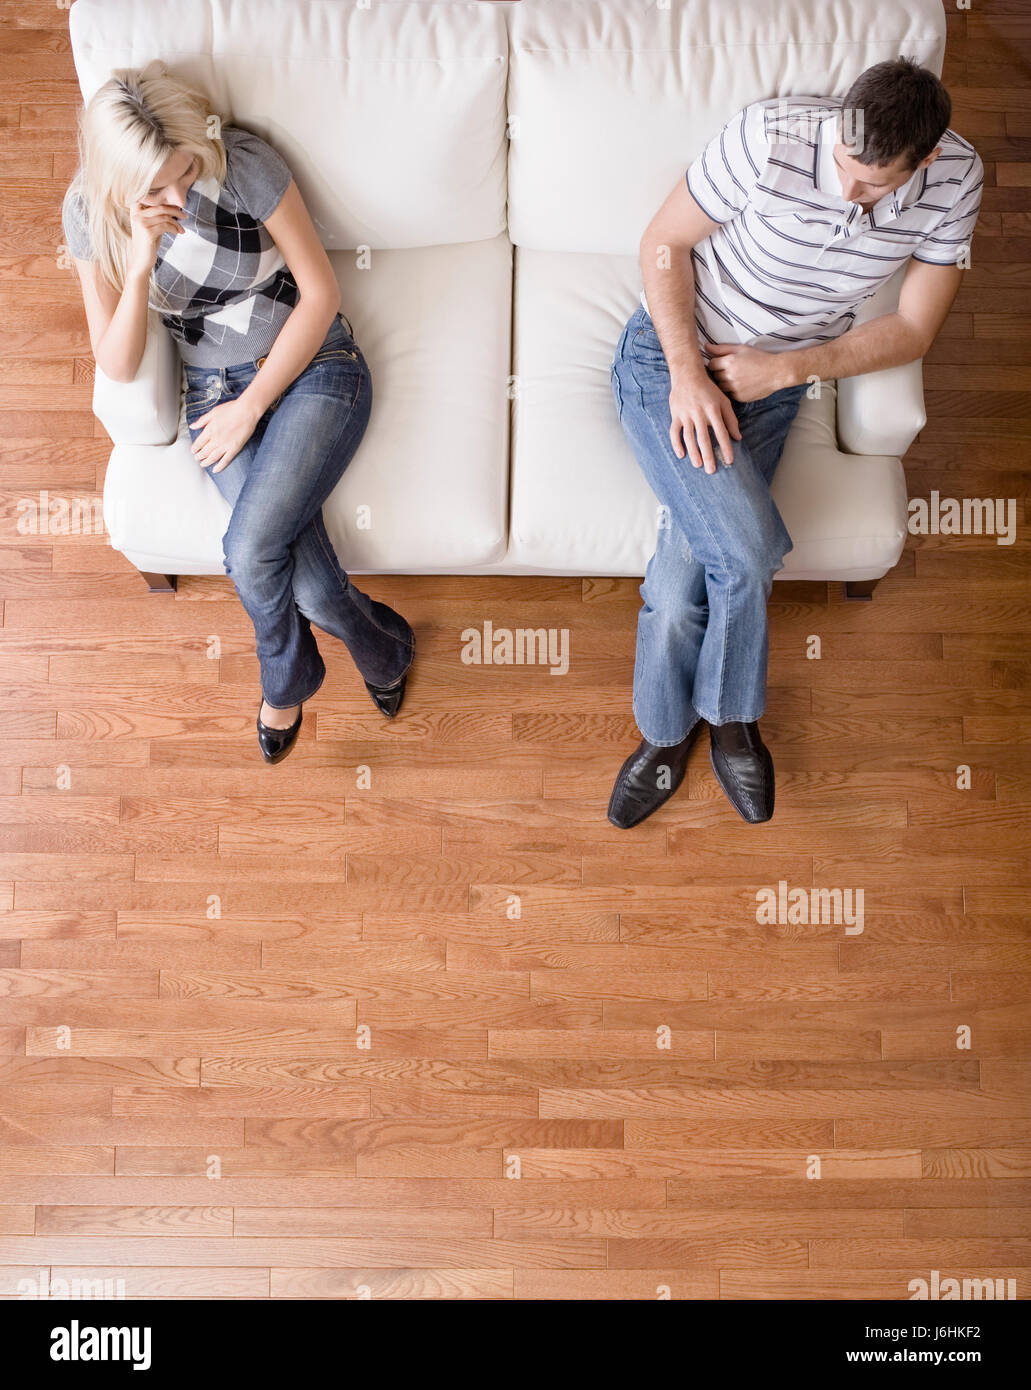 woman fight fighting sofa anger resentment annoy mad argument couple pair  man Stock Photo - Alamy